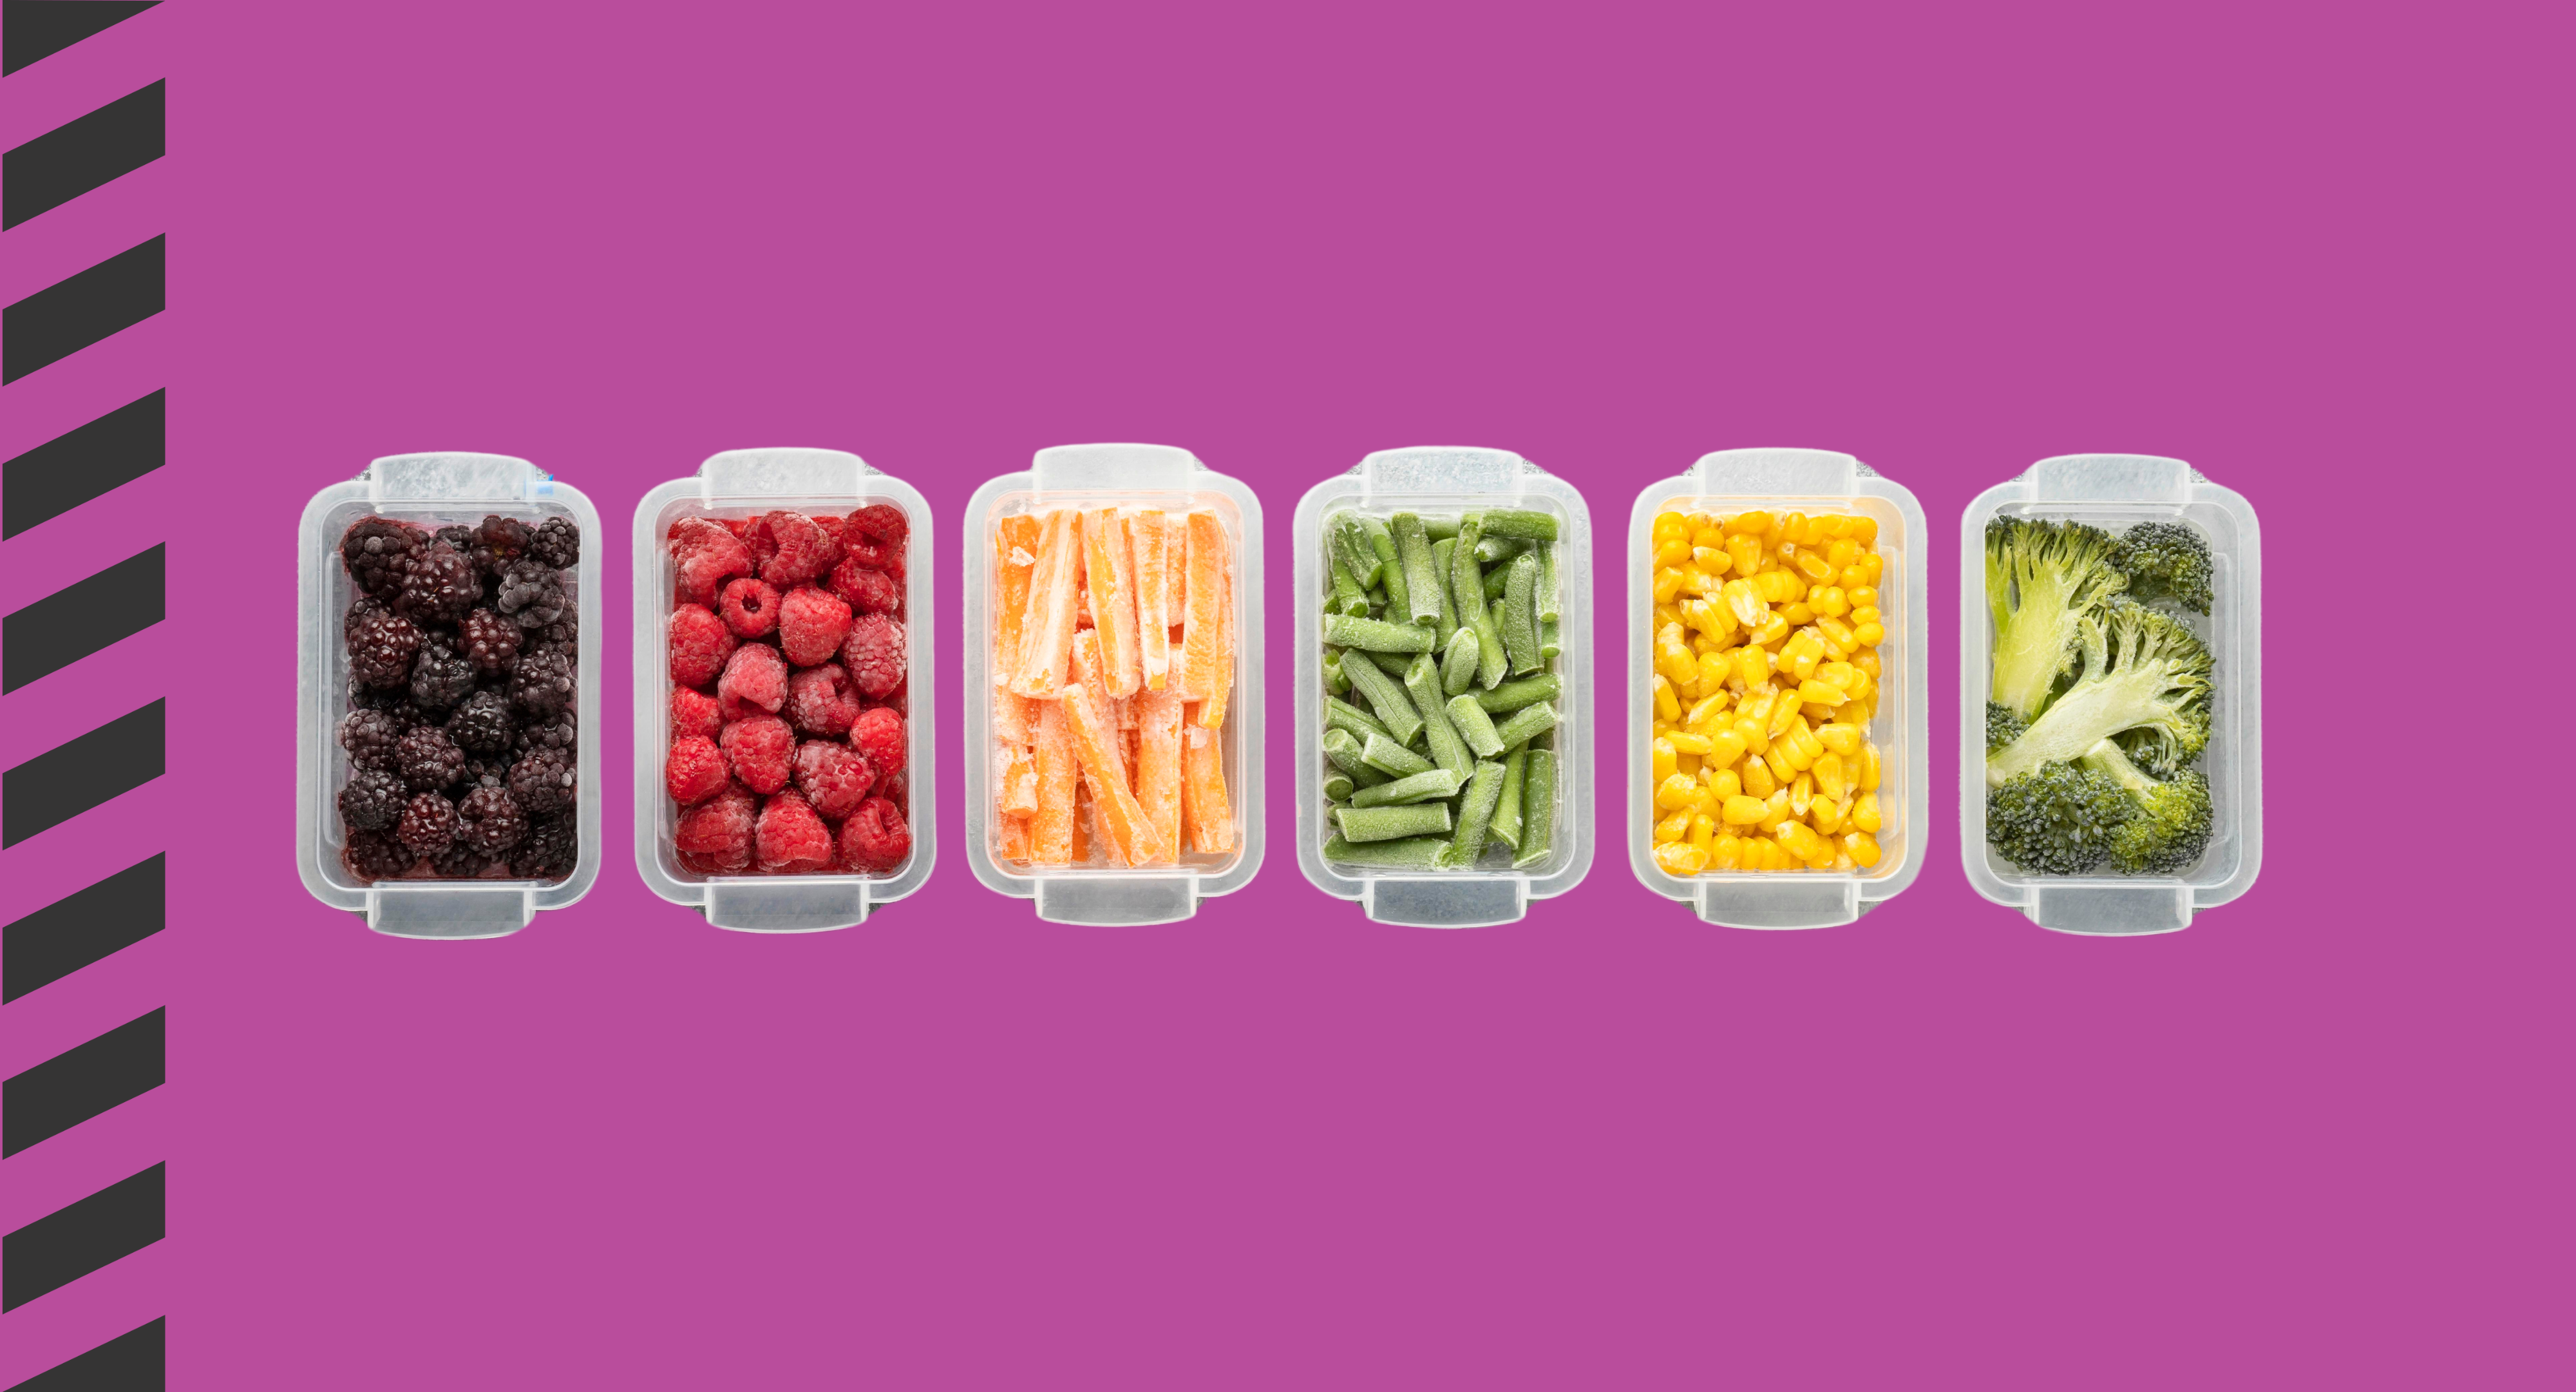 A graphic with various frozen produce in storage containers